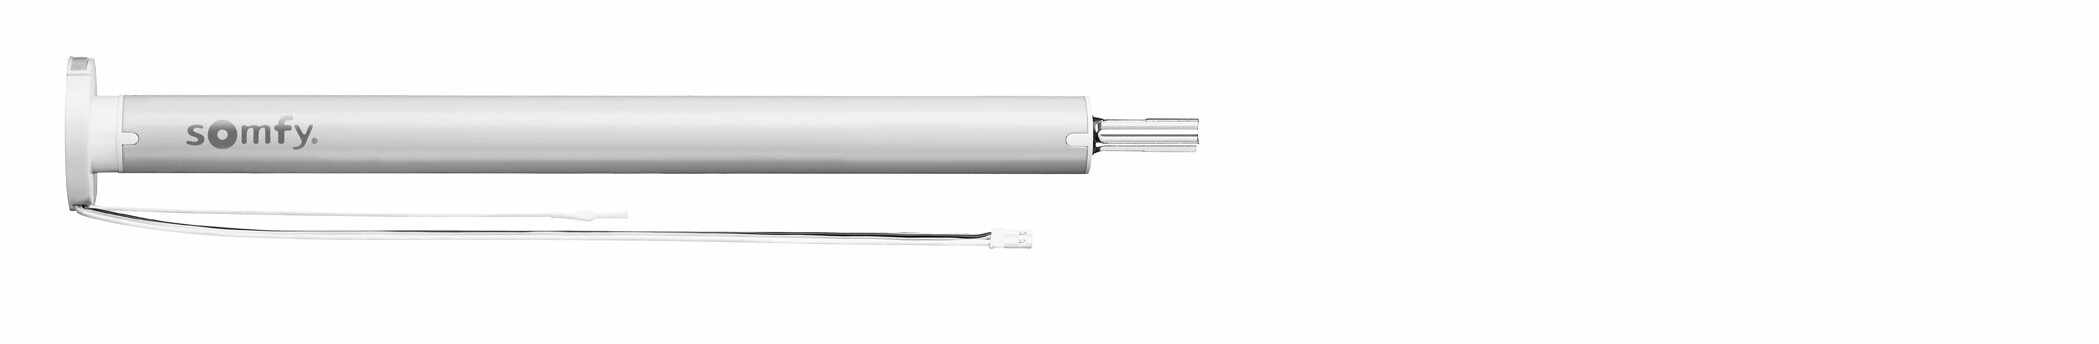 Somfy ST28 RTS 12VDC Shade Motor Kit with 1.5 Inch x 60 Inch Tube